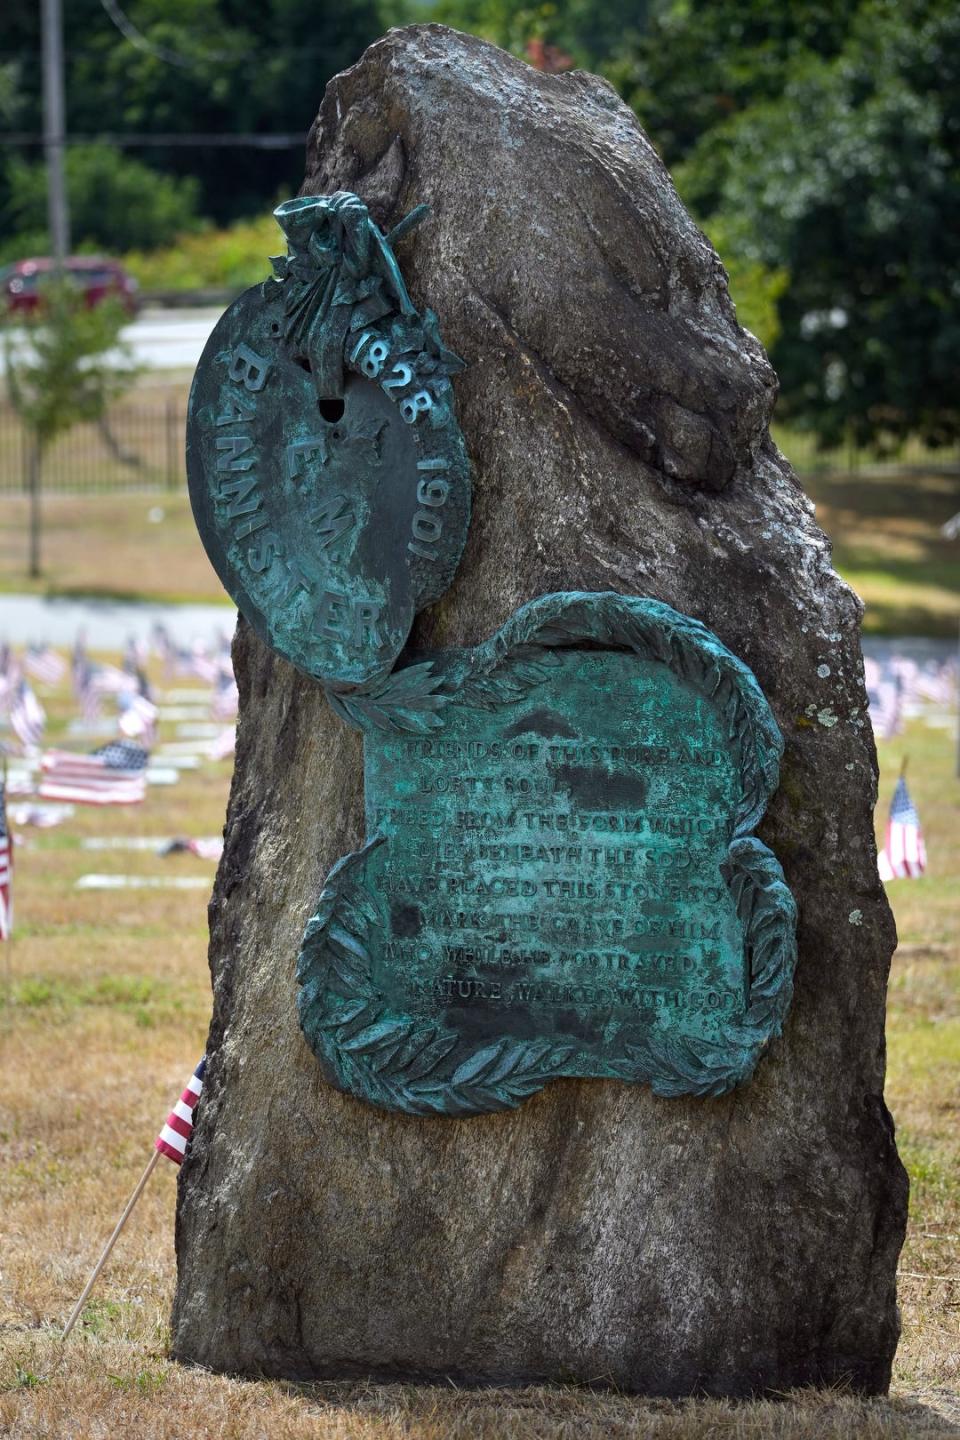 The gravestone of Edward M. Bannister, one of the few African American painters of the 19th century to win significant recognition.